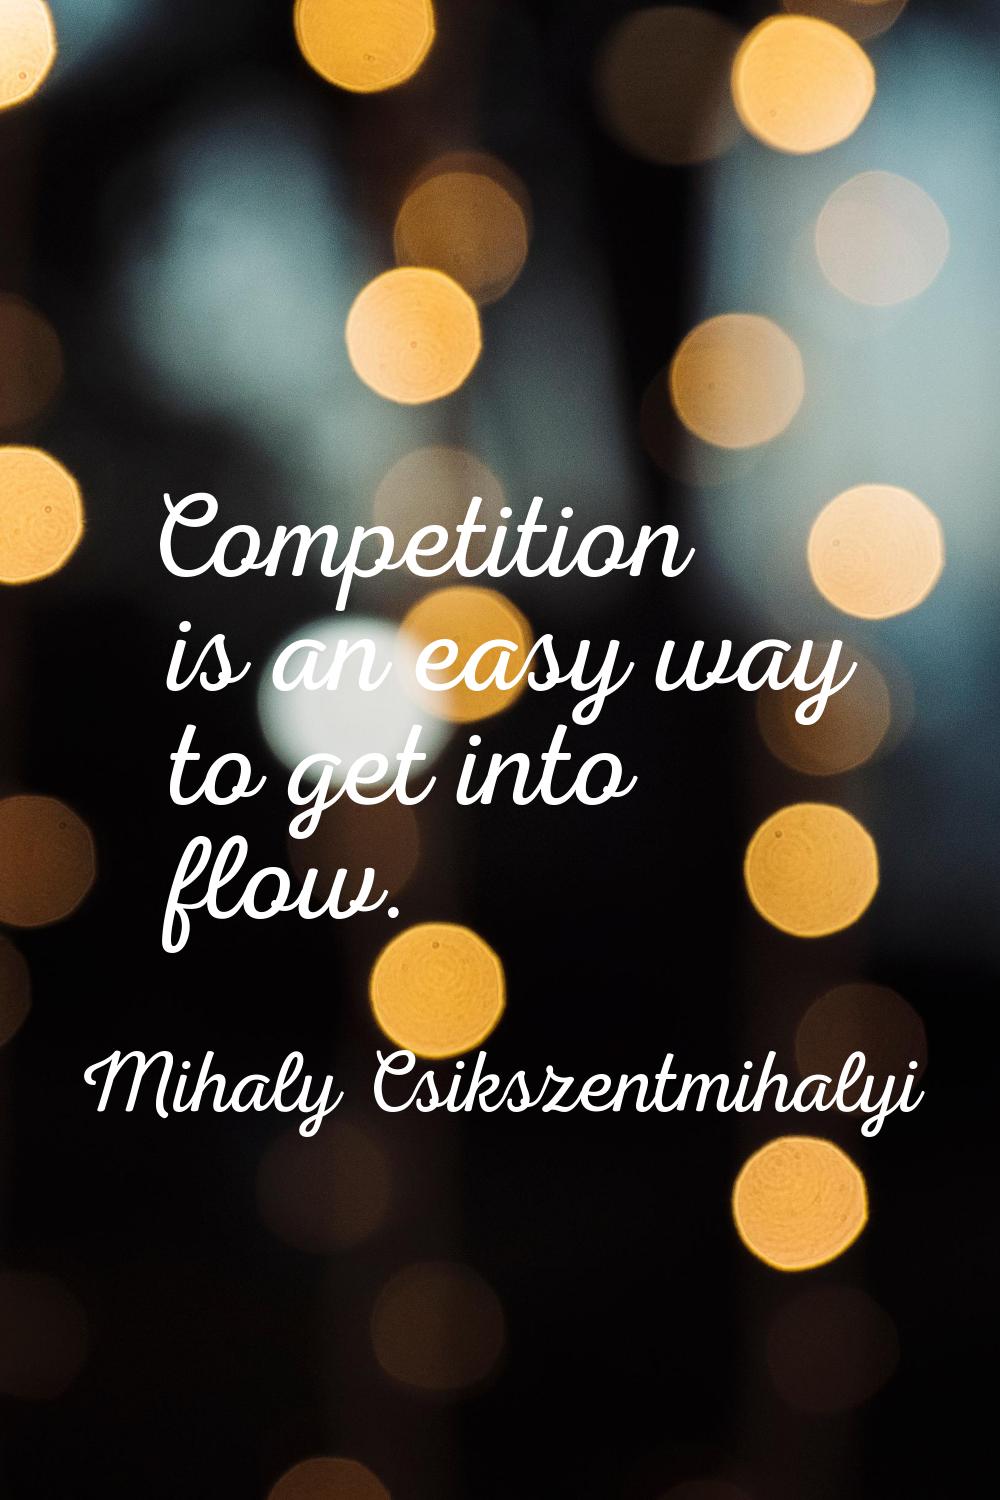 Competition is an easy way to get into flow.